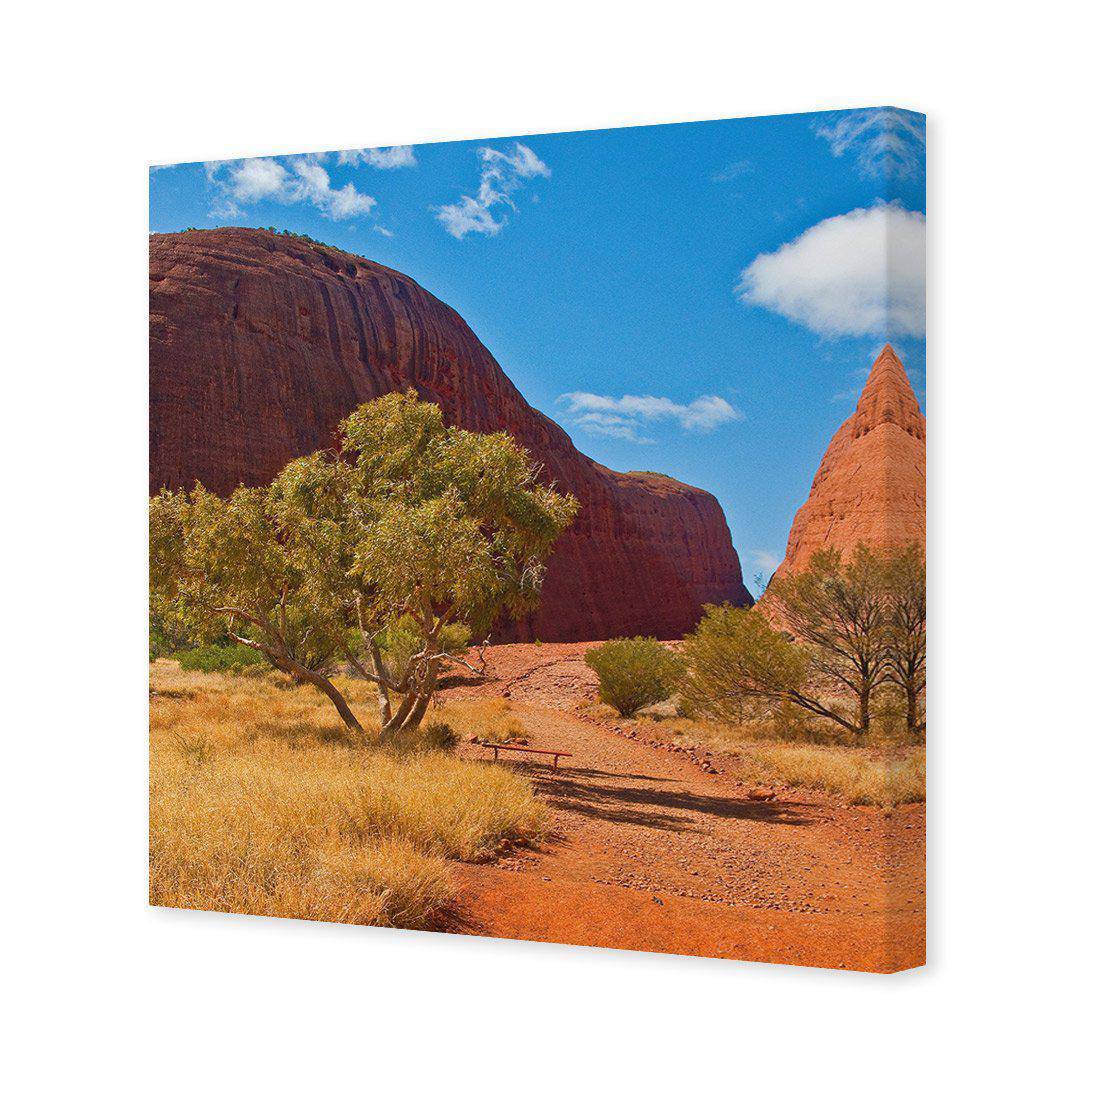 Into The Outback Canvas Art-Canvas-Wall Art Designs-30x30cm-Canvas - No Frame-Wall Art Designs